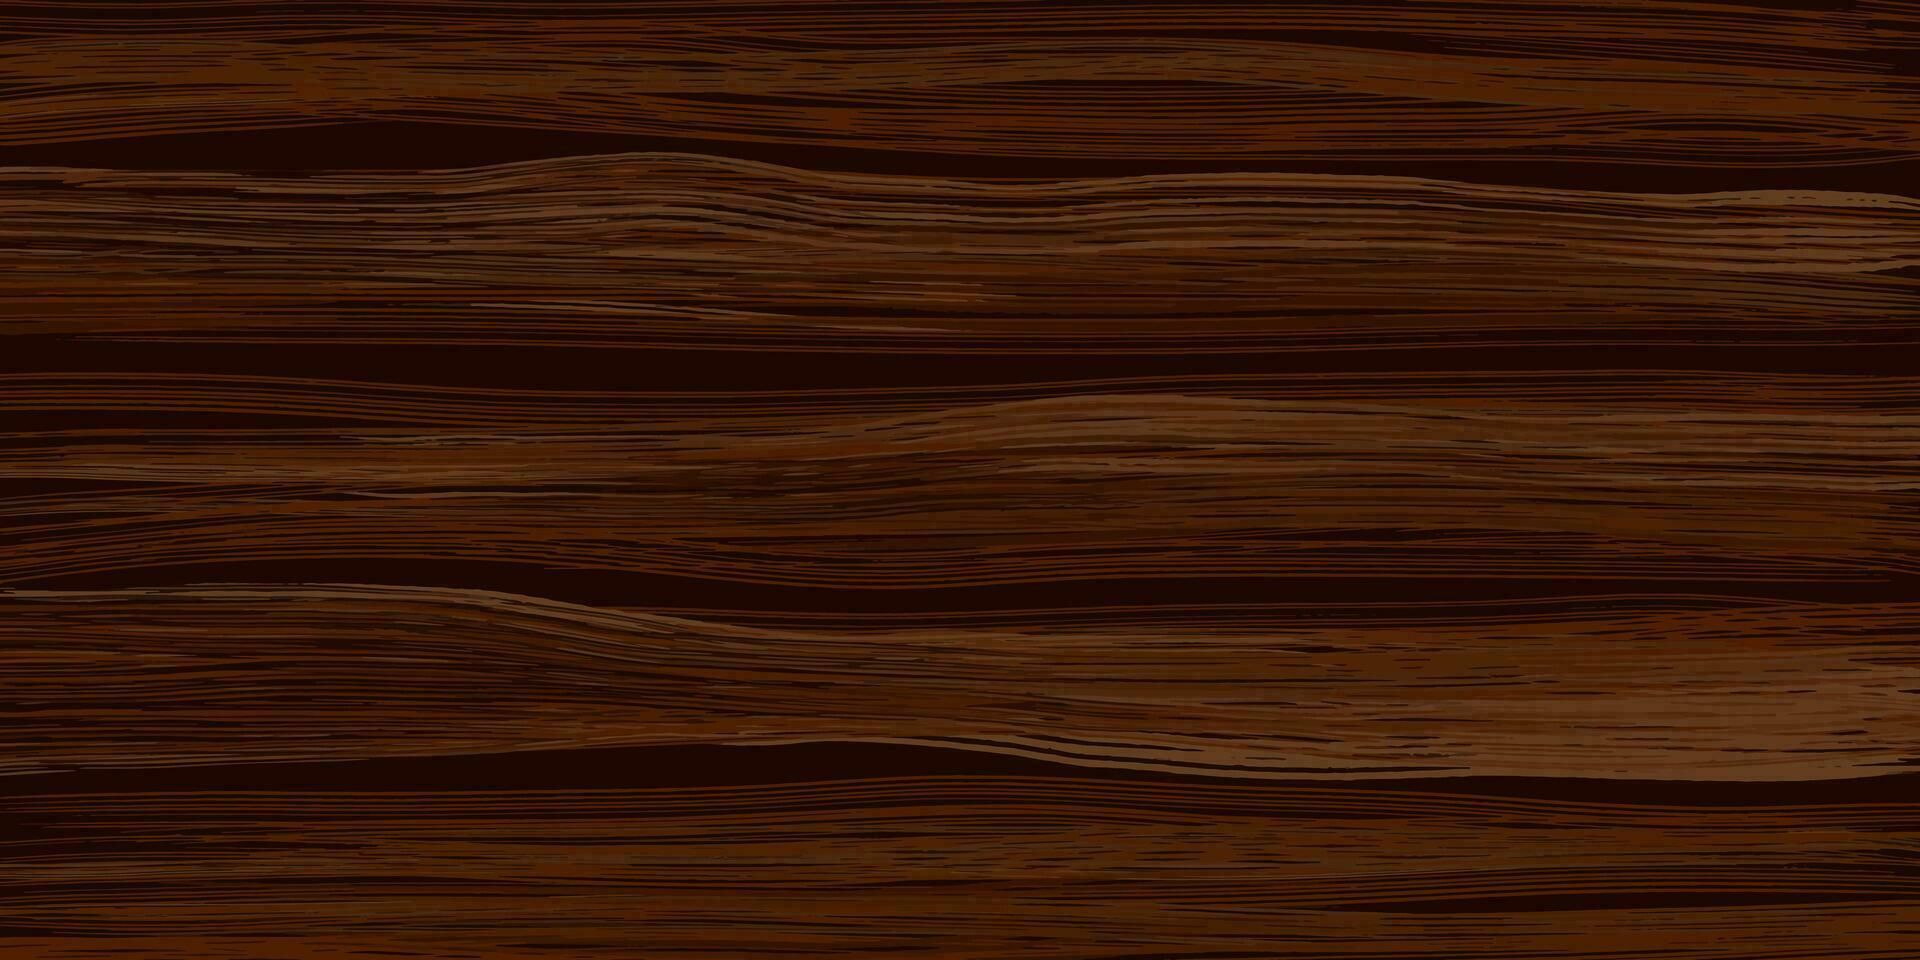 Dark wood texture background. Old dried horizontal wooden planks. Vector illustration